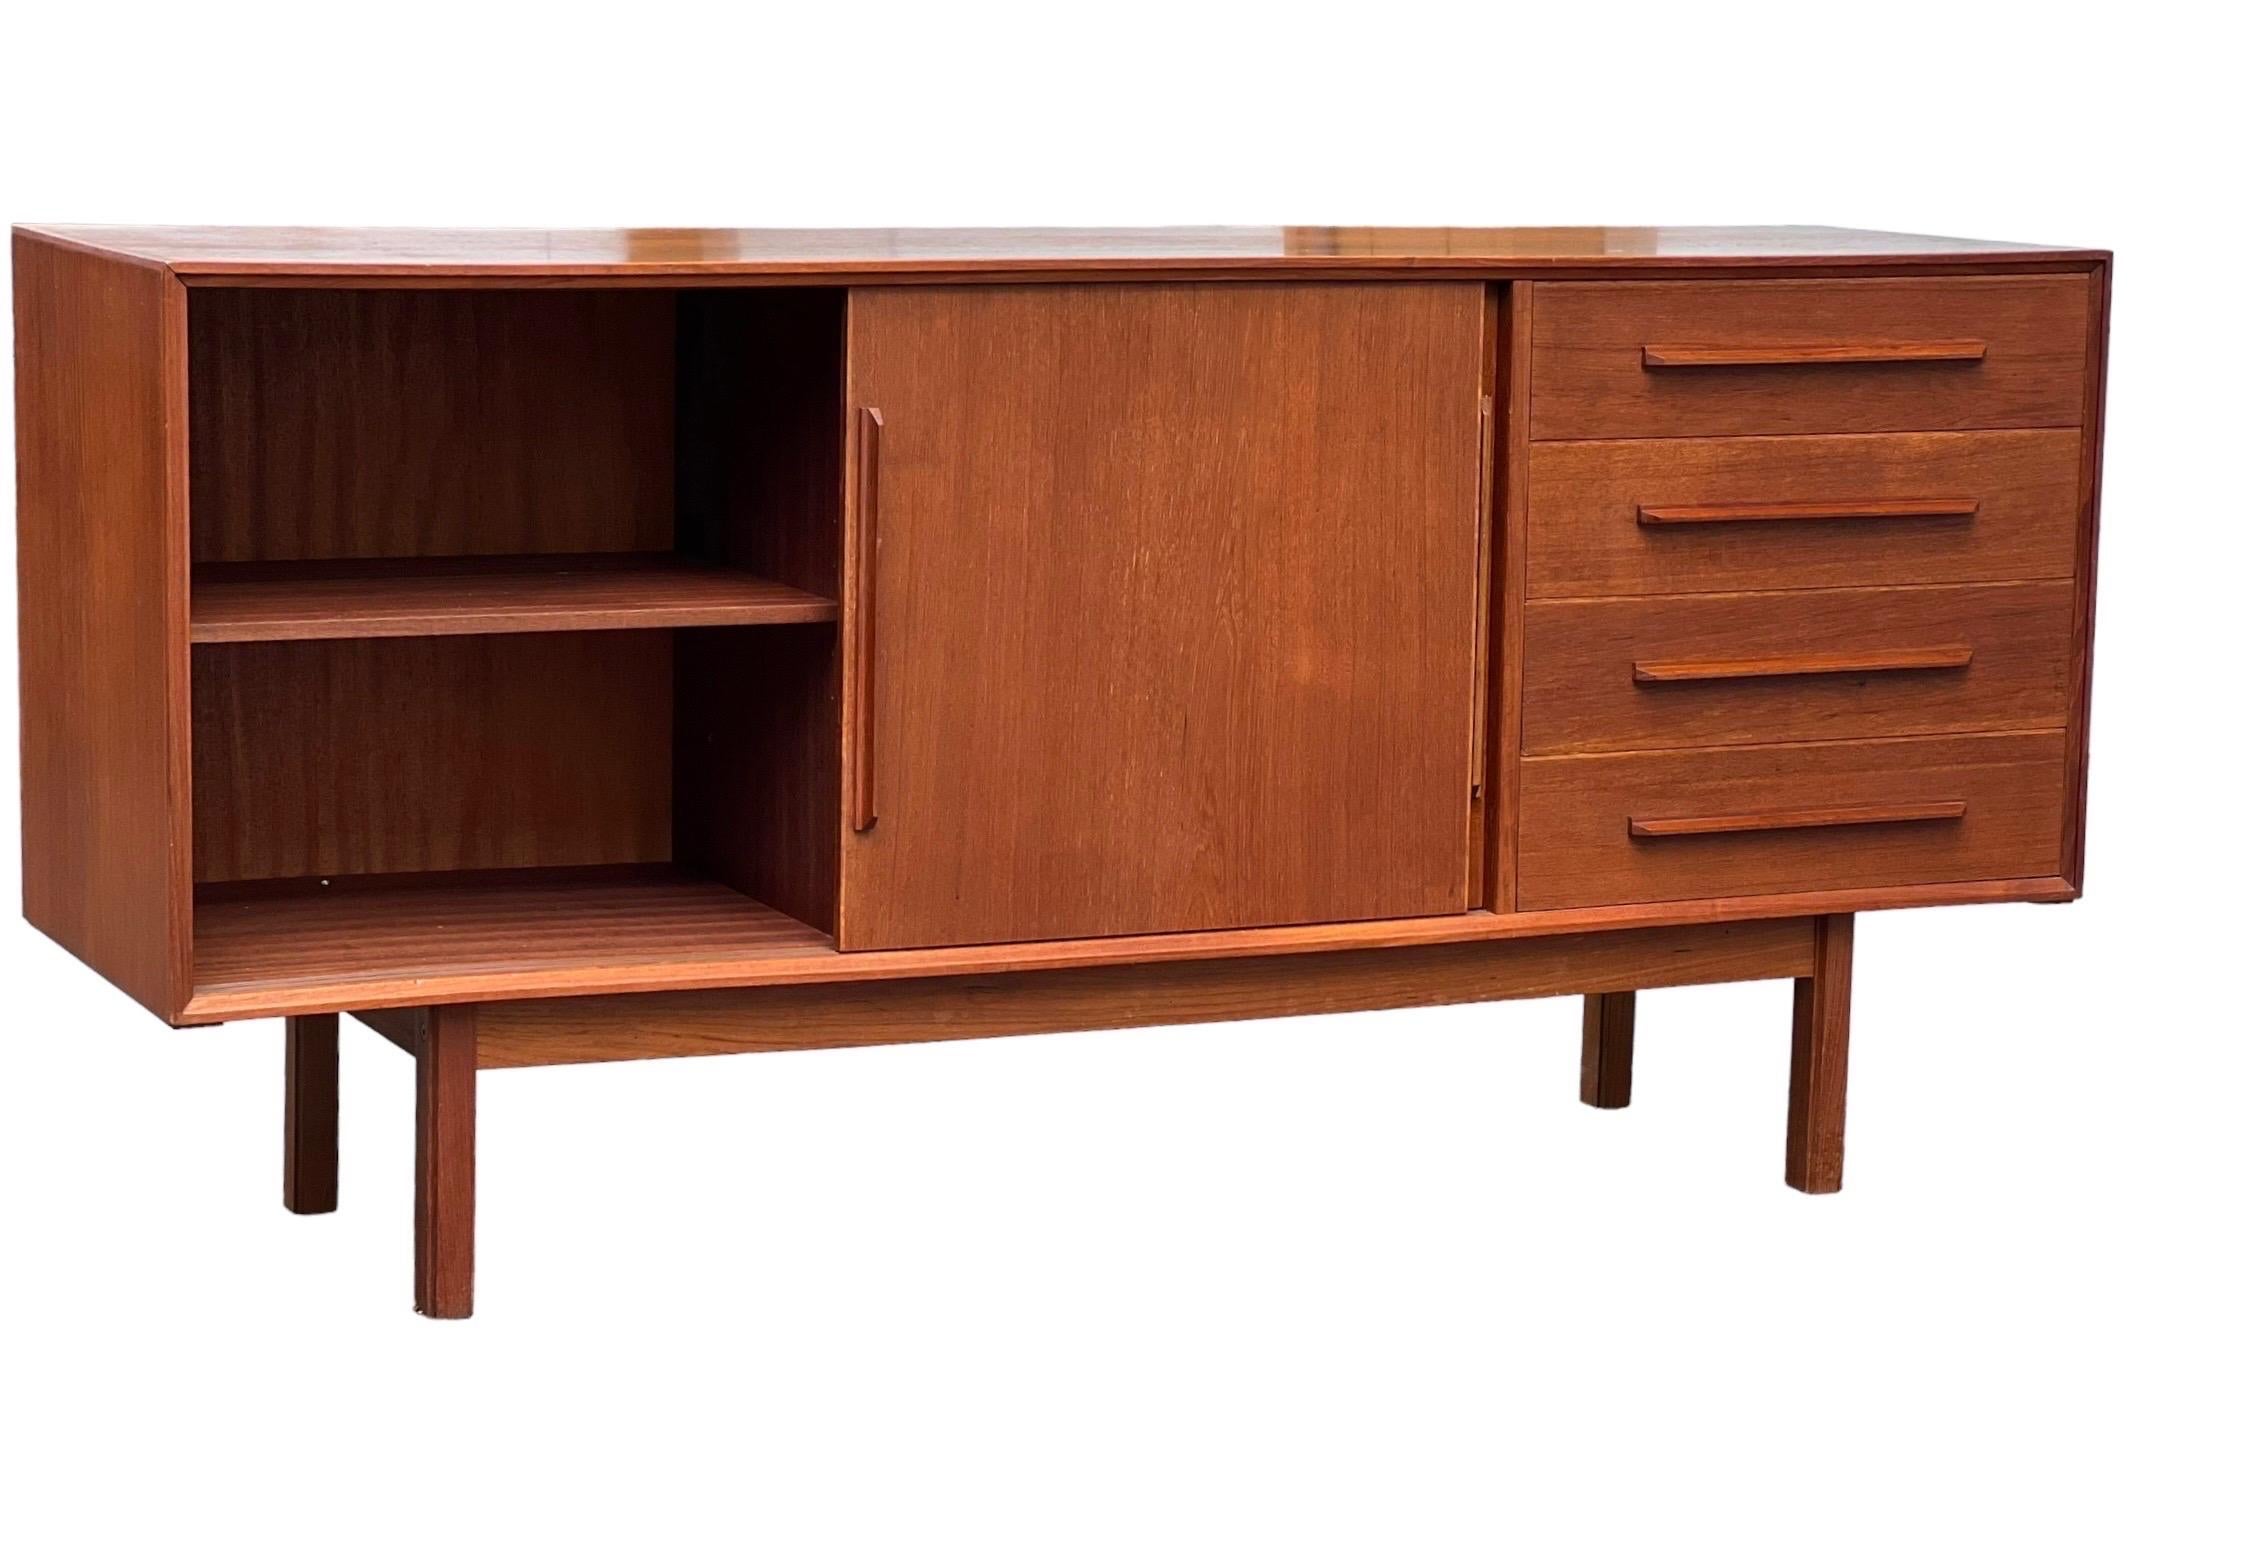 Late 20th Century Vintage Danish Mid Century Modern Credenza or Media Stand Anne Vodder Style  For Sale